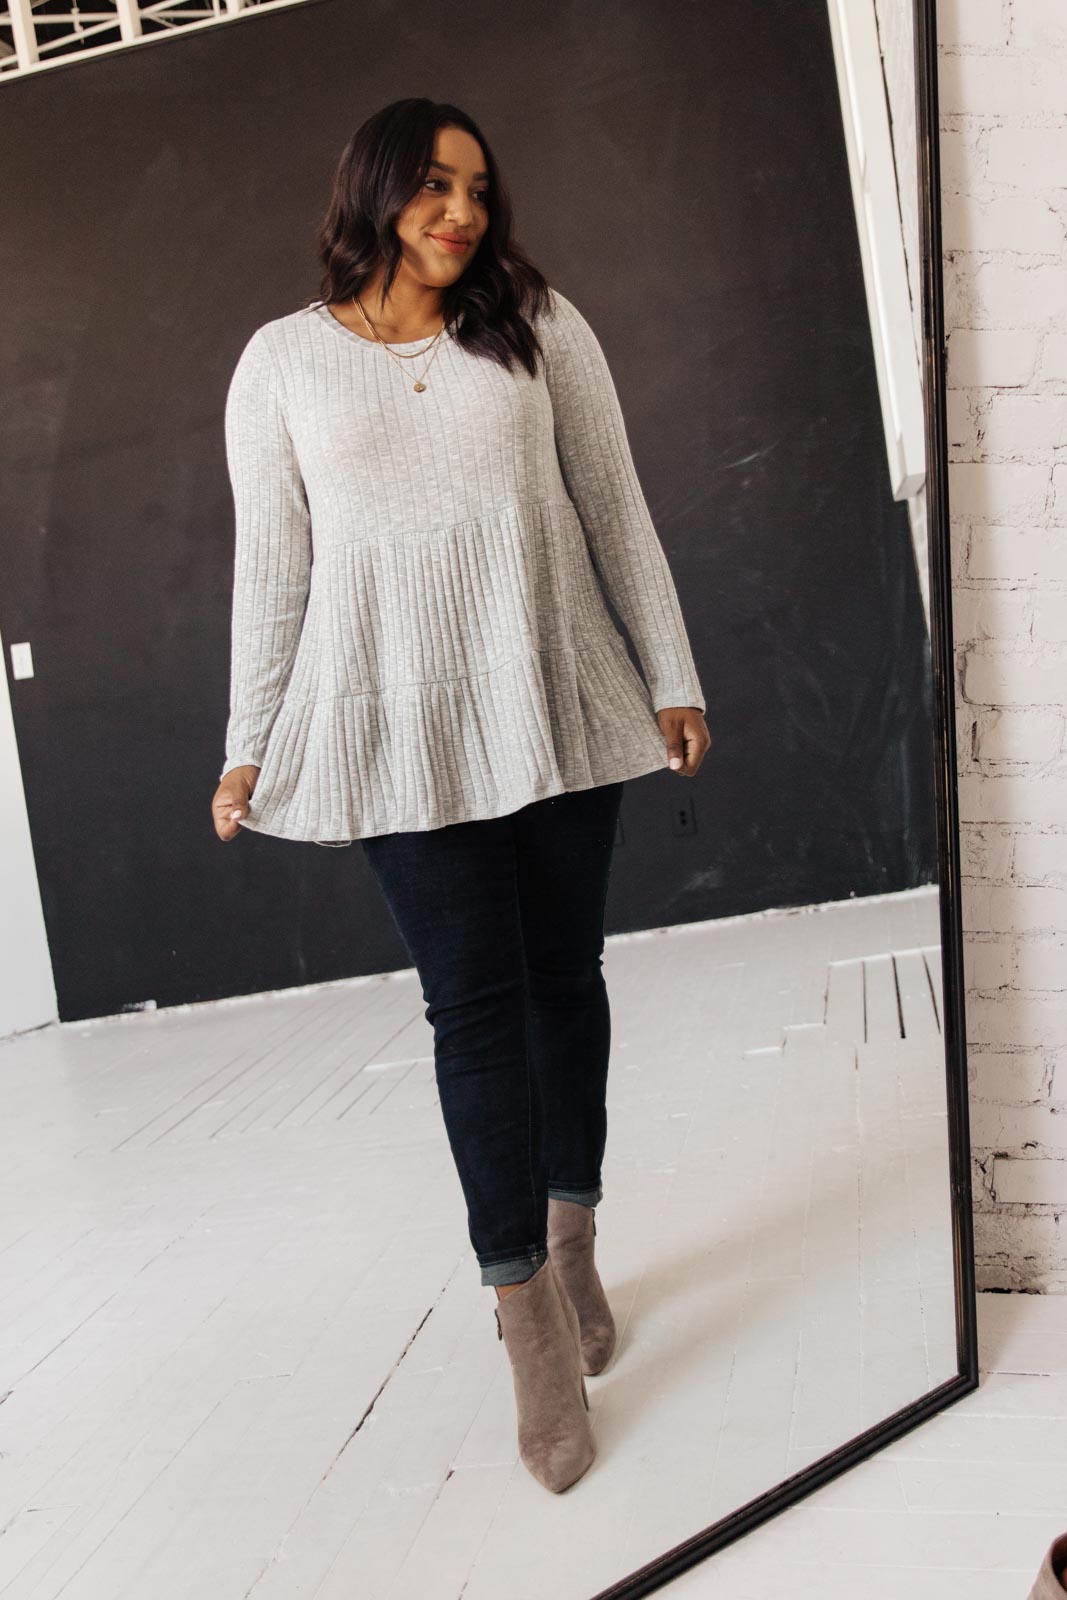 Give A Twirl Sweater in Gray